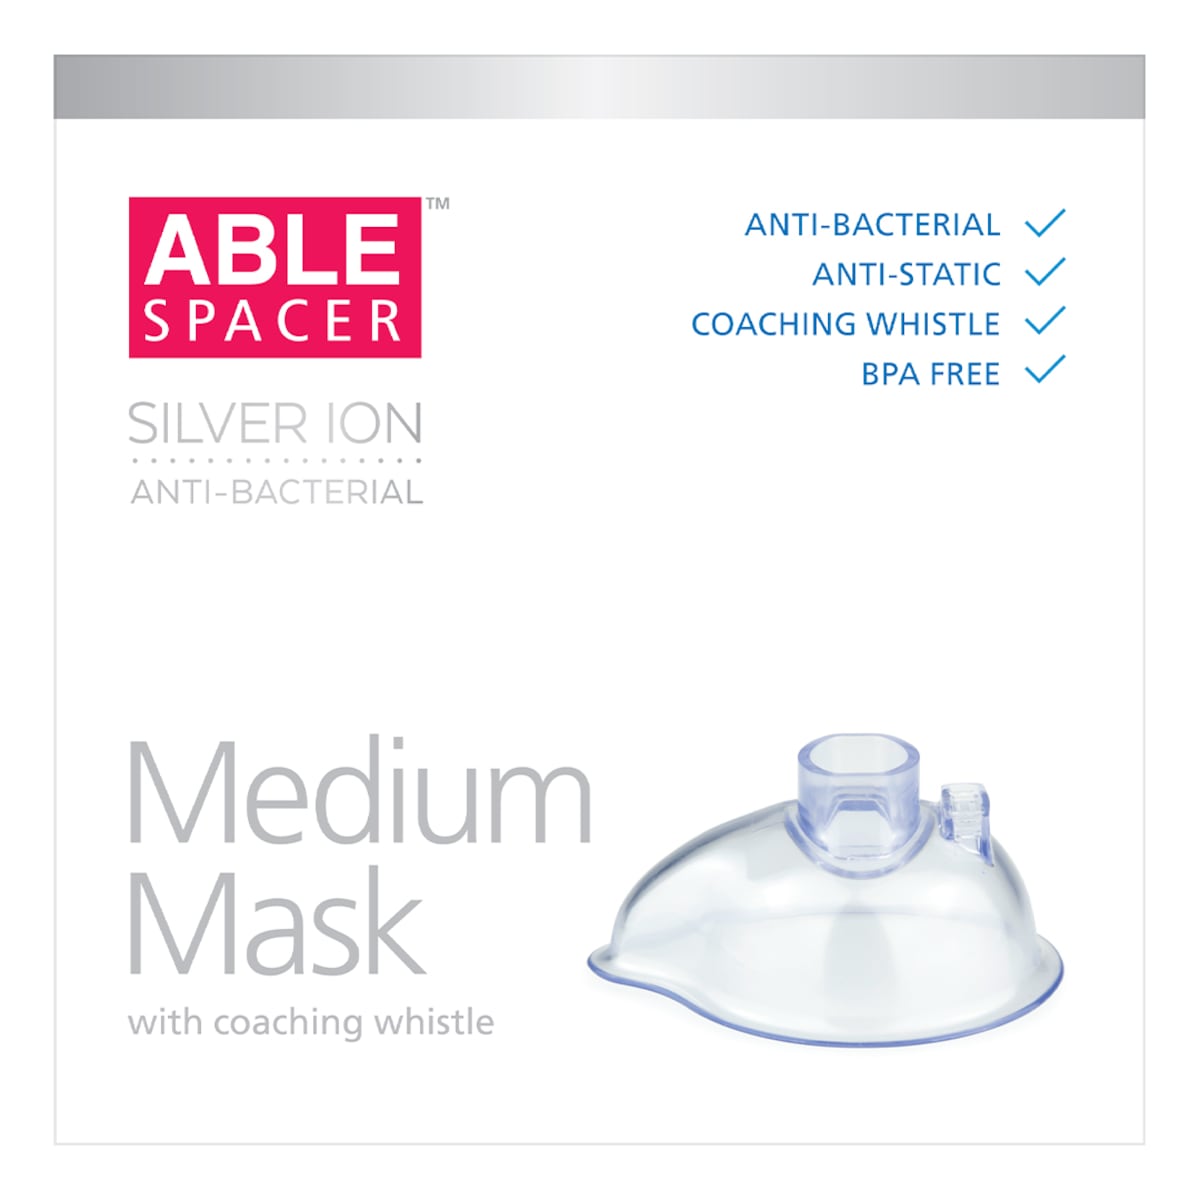 ABLE Spacer Whistle Mask AntiBacterial Medium